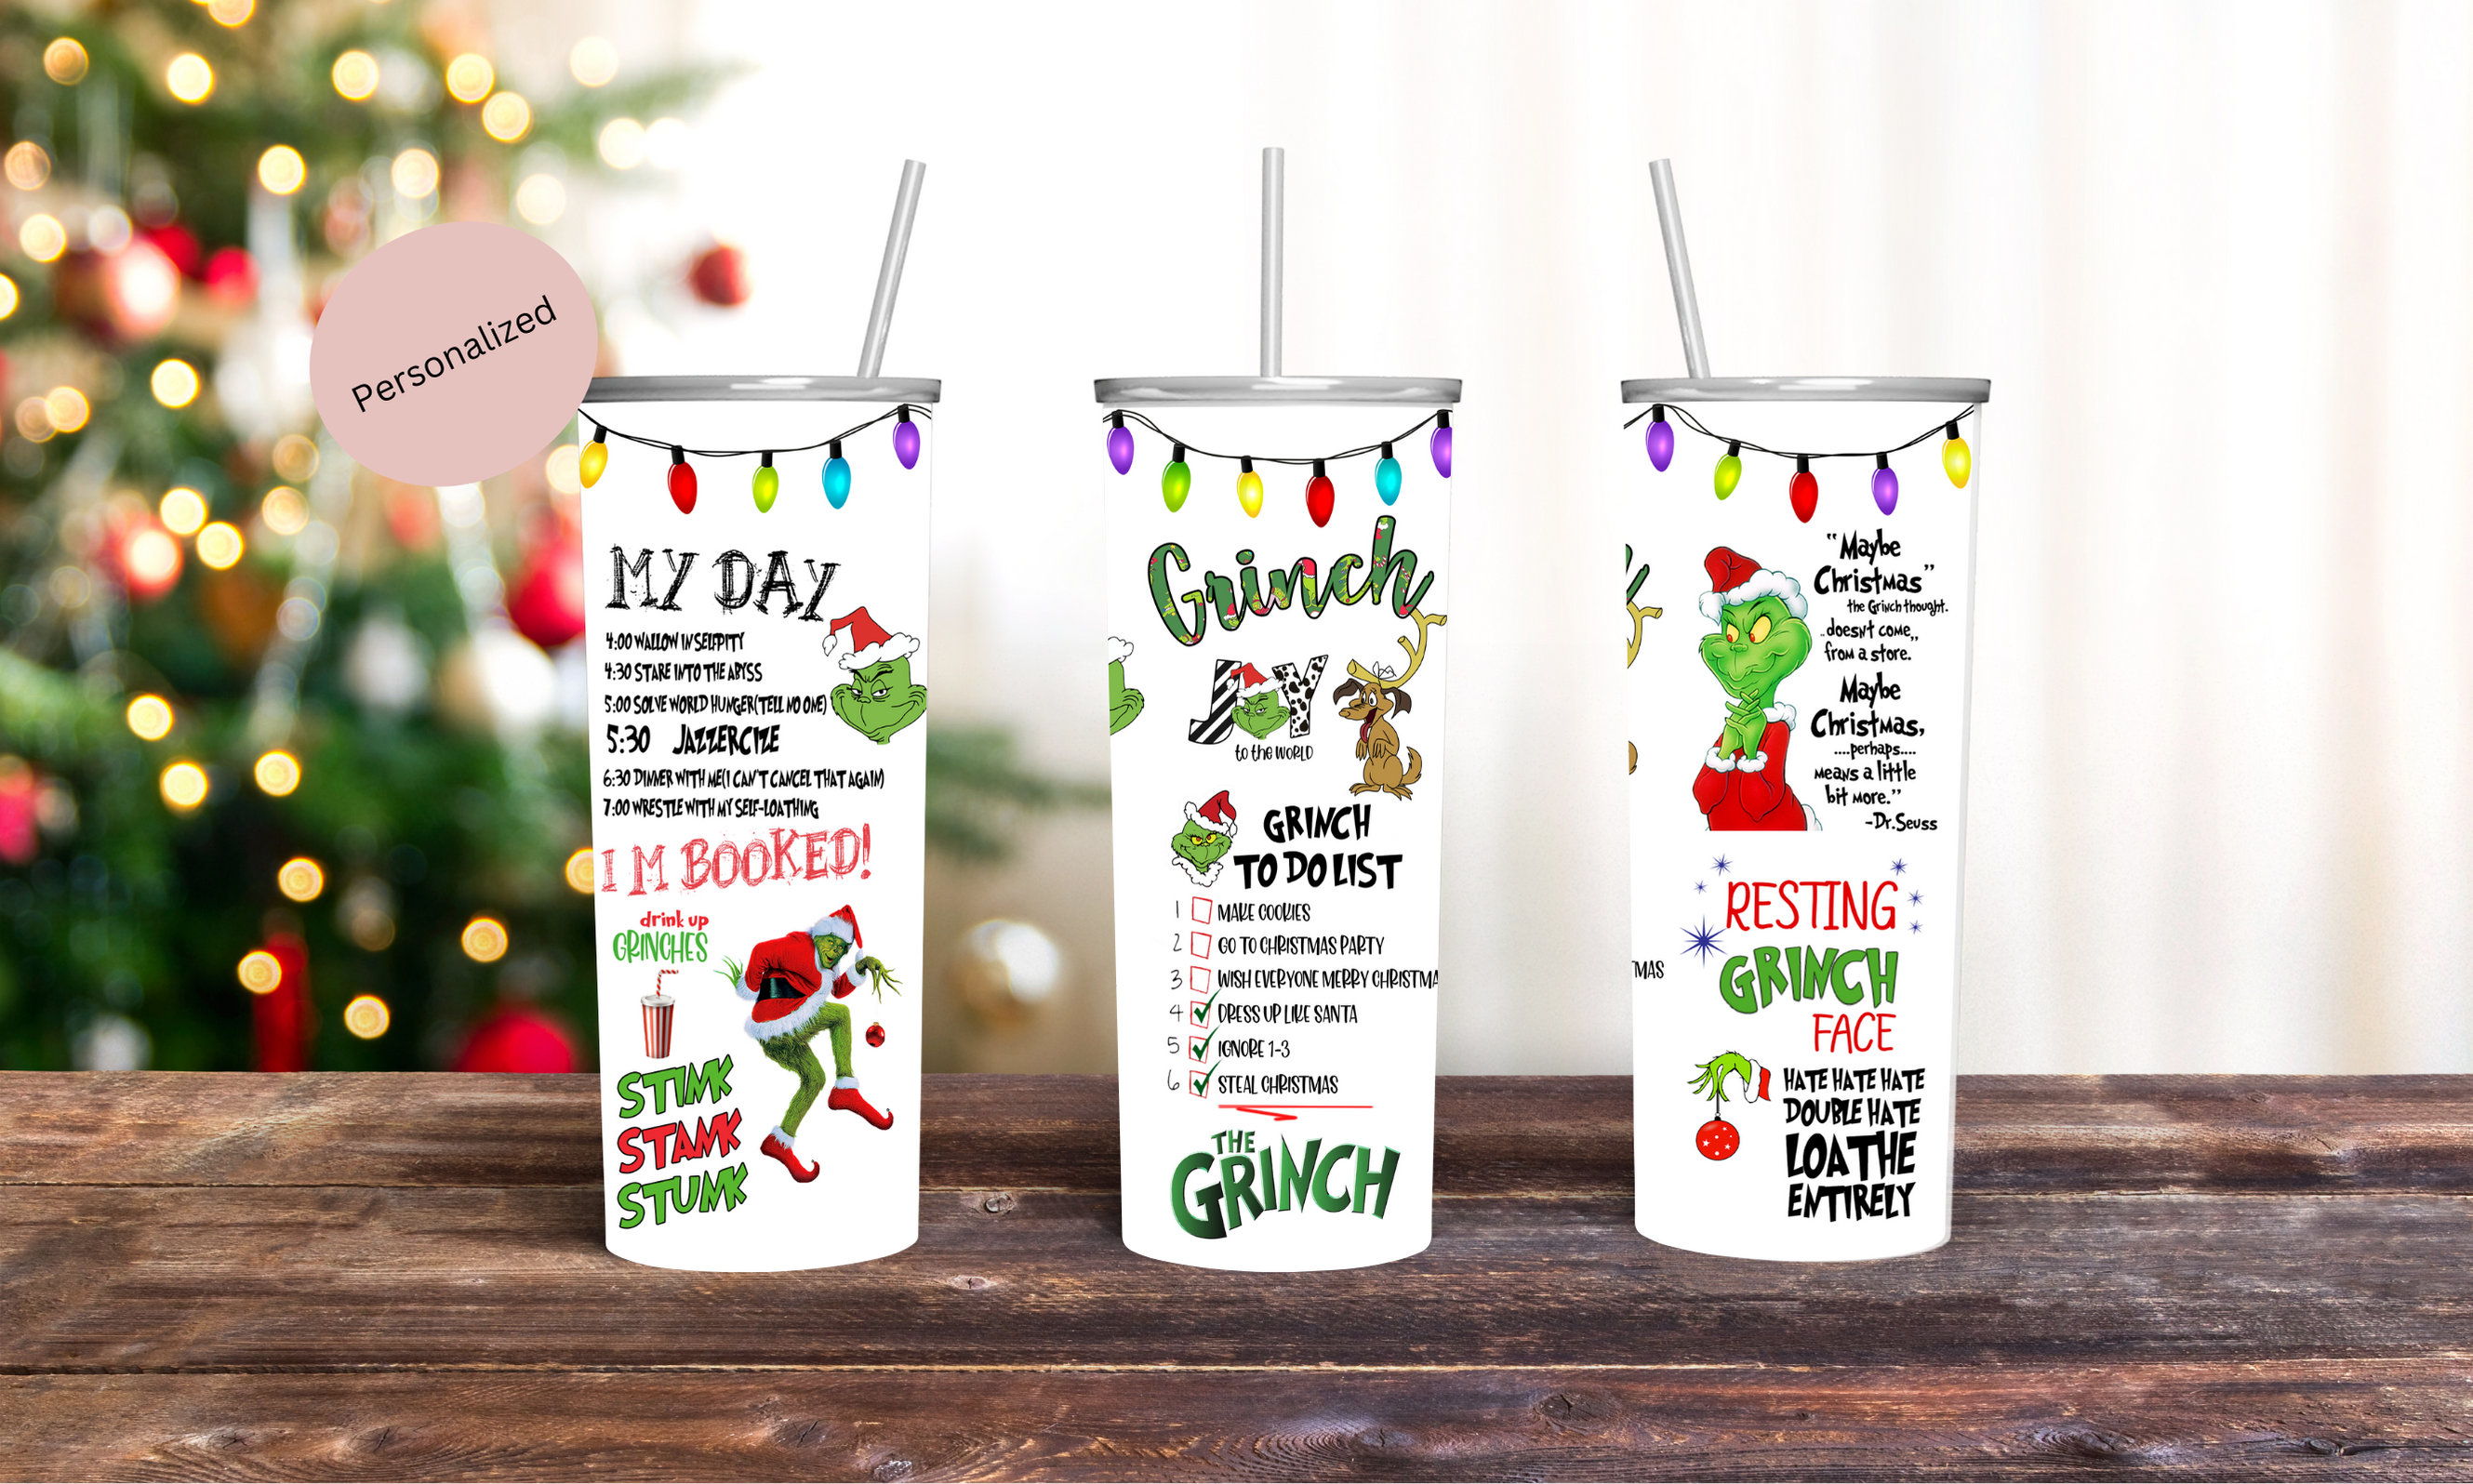 THE GRINCH Christmas Stainless Steel Water Bottle 25 oz Dr. Suess